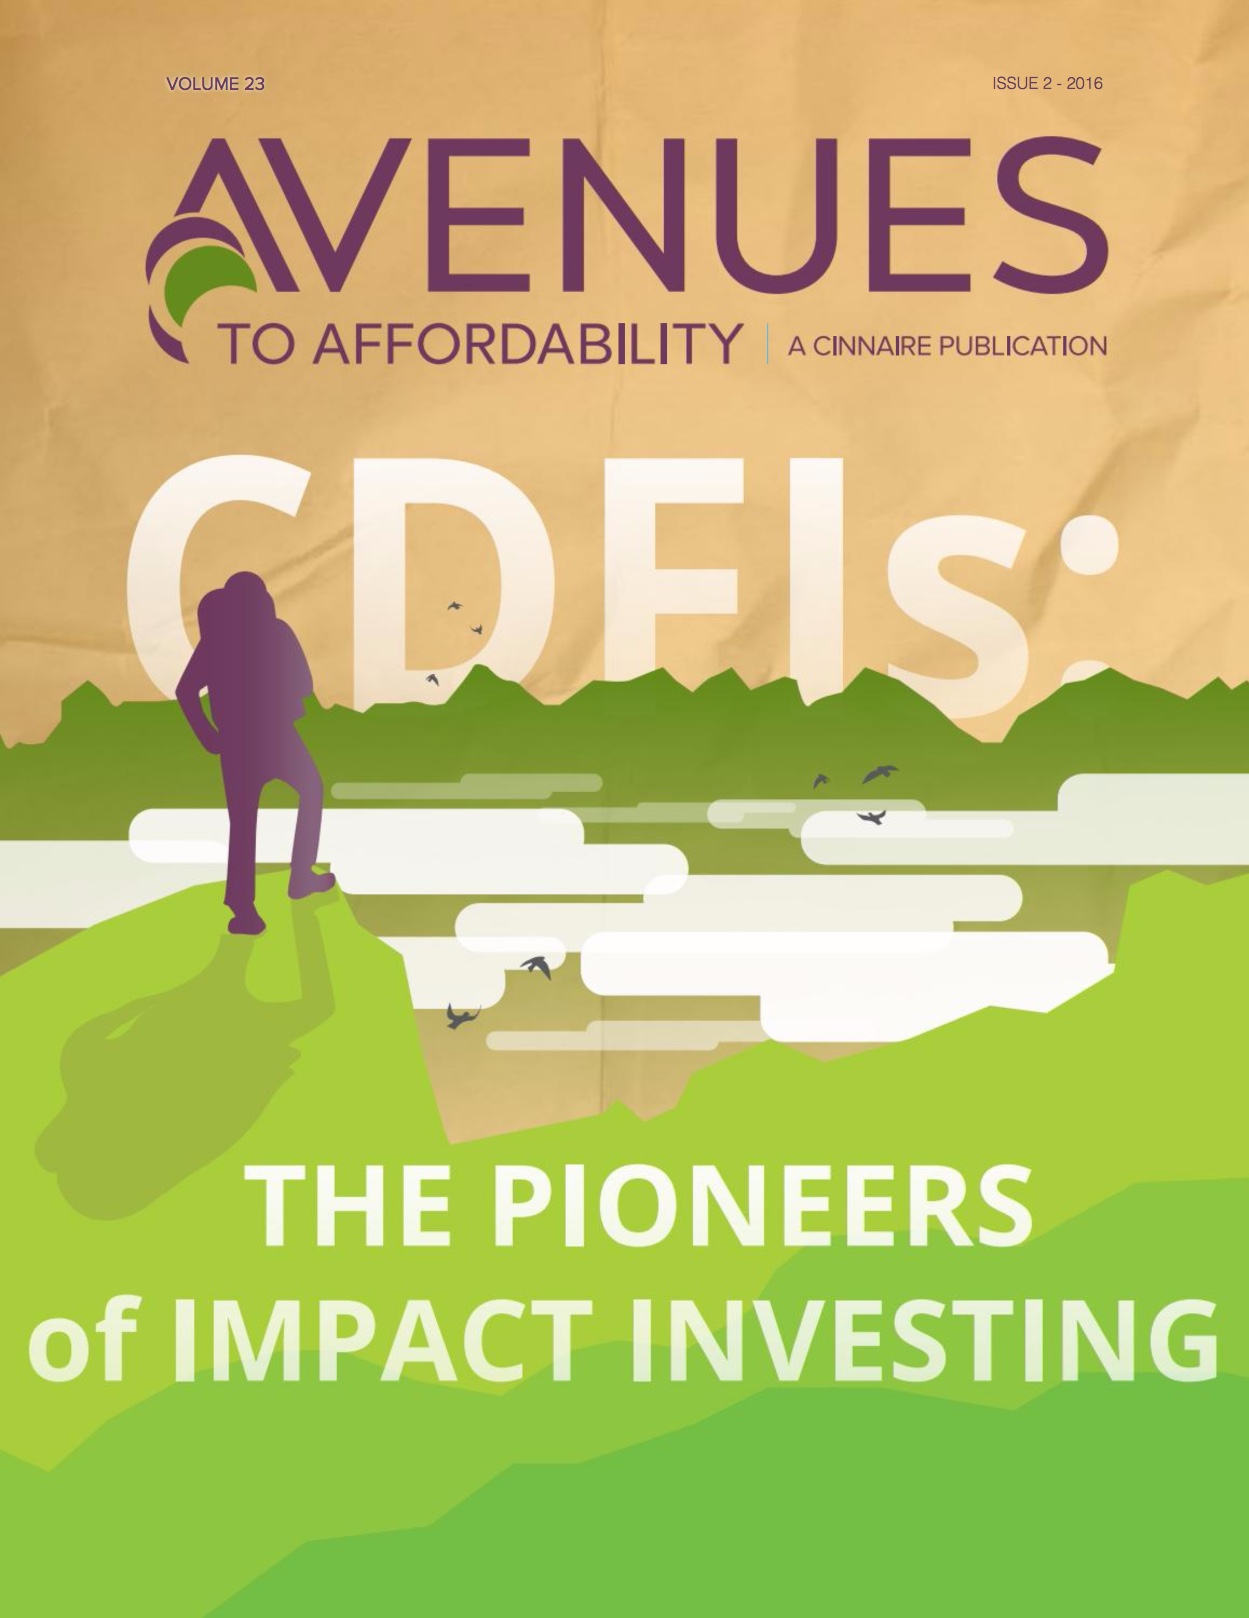 Avenues to Affordability: The Pioneers of Impact Investing